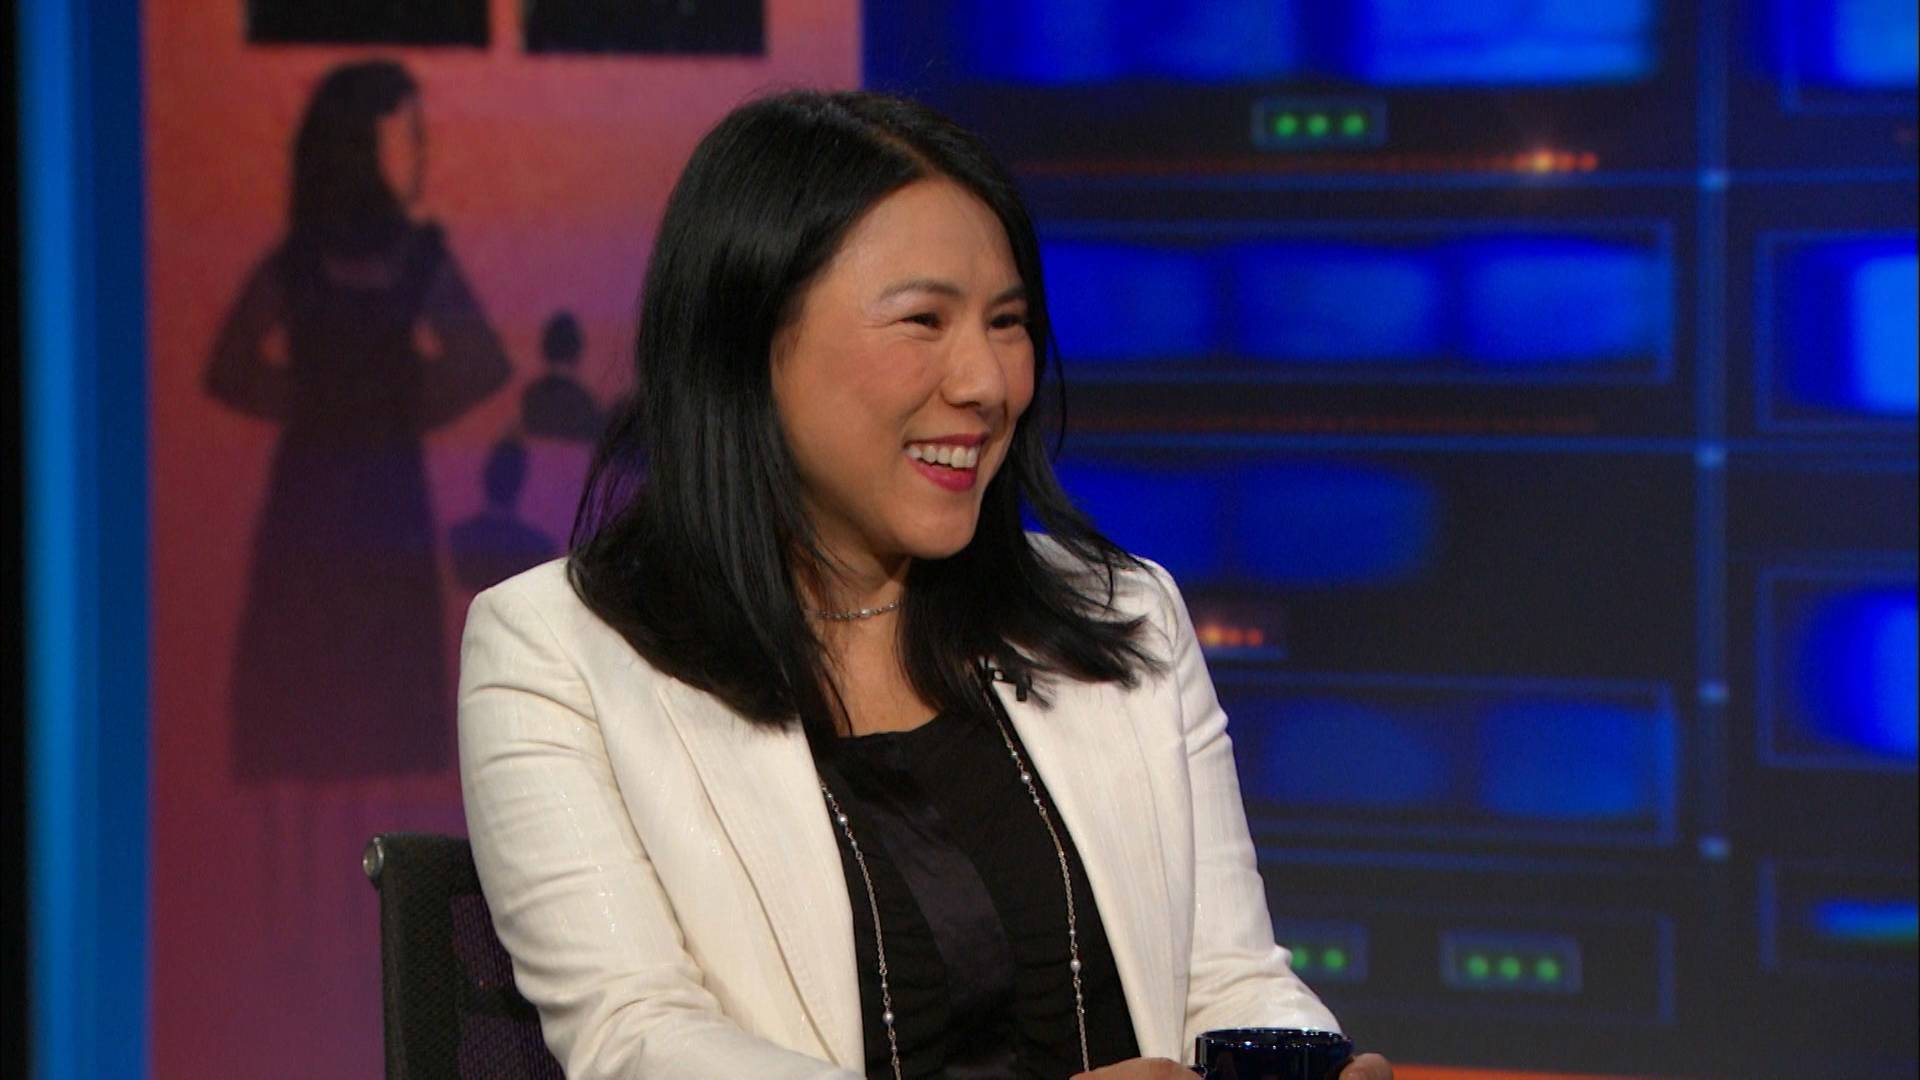 Suki Kim - The Daily Show with Jon Stewart (Video Clip) | Comedy Central US